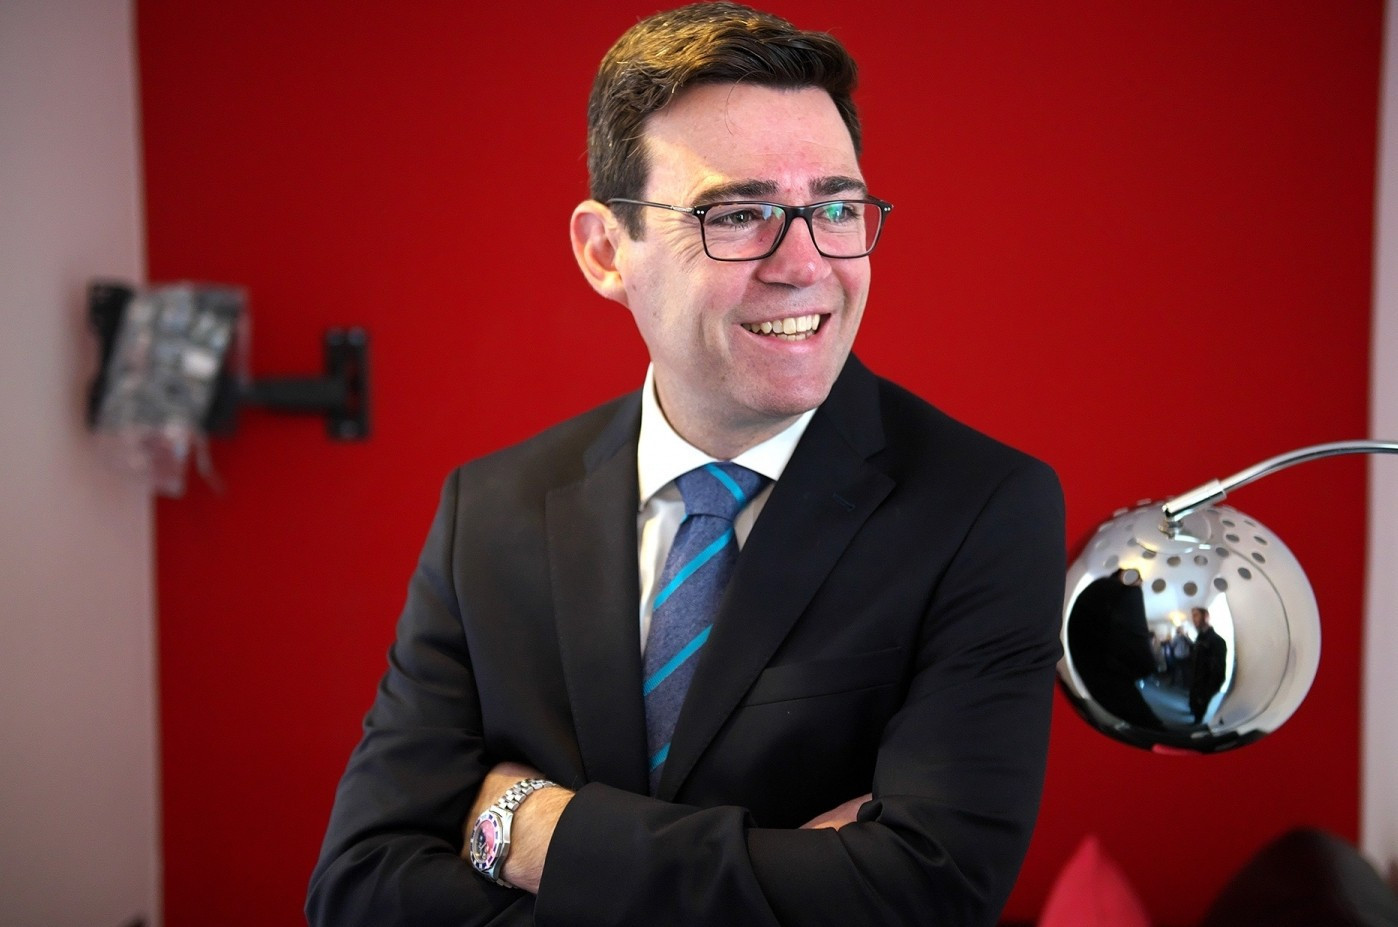 Andy Burnham, the current Mayor of Manchester, is the new President of the Rugby Football League ©rugby-league.com